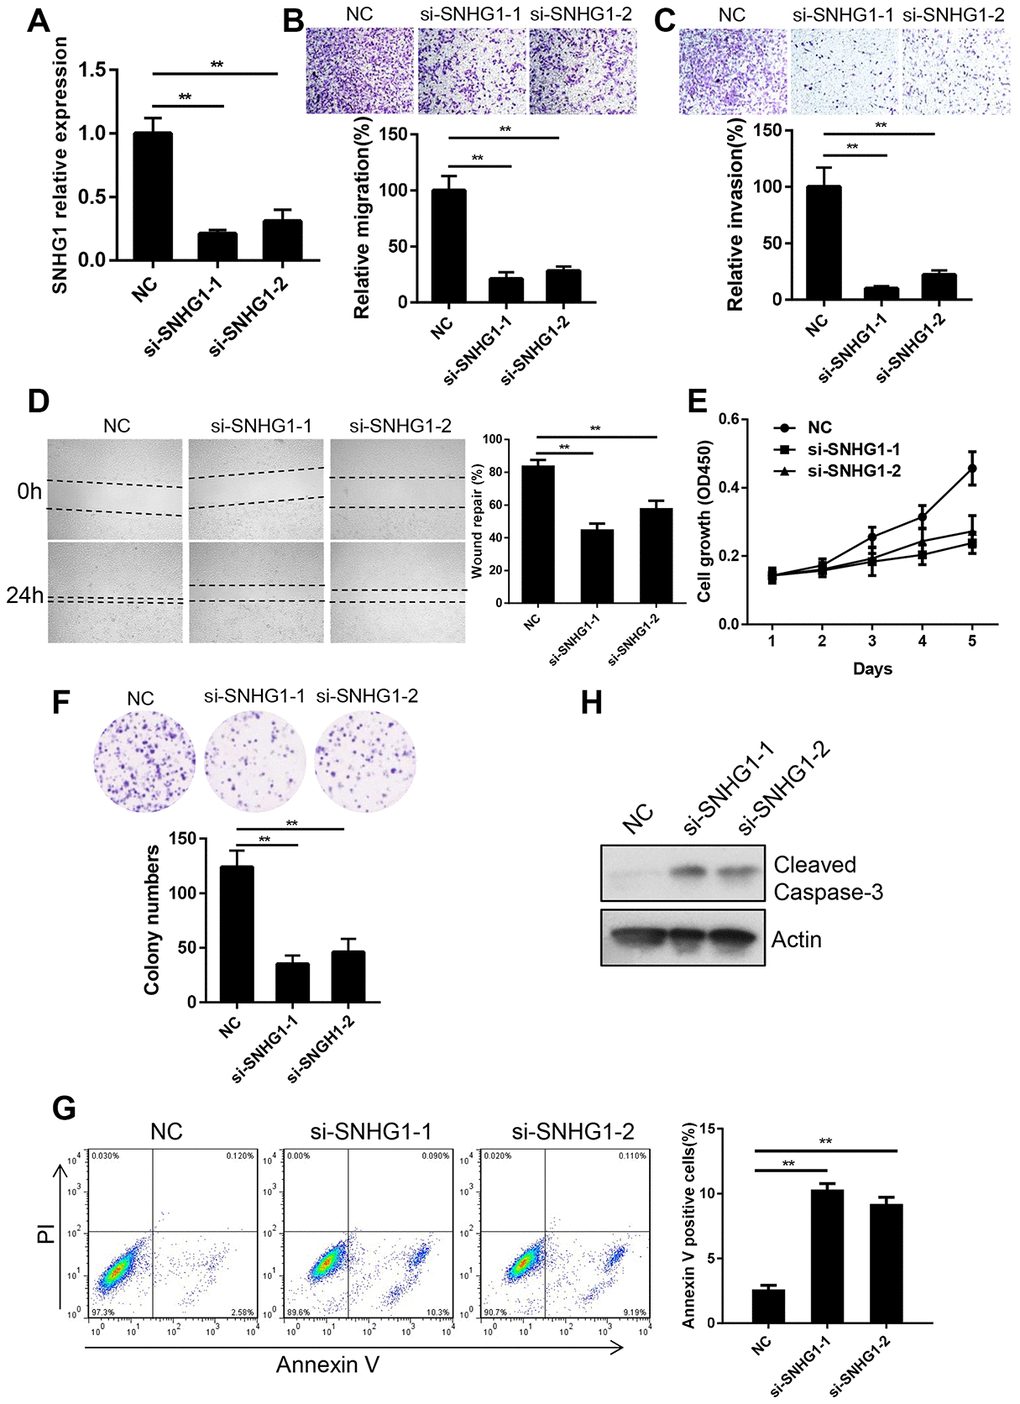 SNHG1 promotes breast cancer cell migration, invasion and proliferation in vitro. (A) Q-RT-PCR analysis of SNHG1 mRNA levels in MDA-MB-231 cells transfected with NC, si-SNHG1-1 and si-SNHG1-2 siRNAs. **pB, C) Migration (B) and invasion (C) of MDA-MB-231 cells transfected with NC, si-SNHG1-1 and si-SNHG1-2 siRNAs were examined by transwell assay. Representative images of the cells migrated or invaded to the lower chamber side (top panel). Cell migration and invasion capacities were shown as a percentage of NC control (bottom panel). **pD) Representative images of wound healing assay of MDA-MB-231 cells transfected with NC, si-SNHG1-1 and si-SNHG1-2 siRNAs at indicated time (left panel). Wound repair rate was quantified in the histogram (right panel). **pE, F) Proliferation of MDA-MB-231 cells transfected with NC, si-SNHG1-1 and si-SNHG1-2 siRNAs was examined by CCK-8 assay (E) and colony formation assay (F). (G) Apoptosis of MDA-MB-231 cells transfected with NC, si-SNHG1-1 and si-SNHG1-2 siRNAs was measured using flow cytometry. **pH) Western blot analysis of cleaved Caspase-3 in MDA-MB-231 cells transfected with NC, si-SNHG1-1 and si-SNHG1-2 siRNAs. Actin was used as loading control.